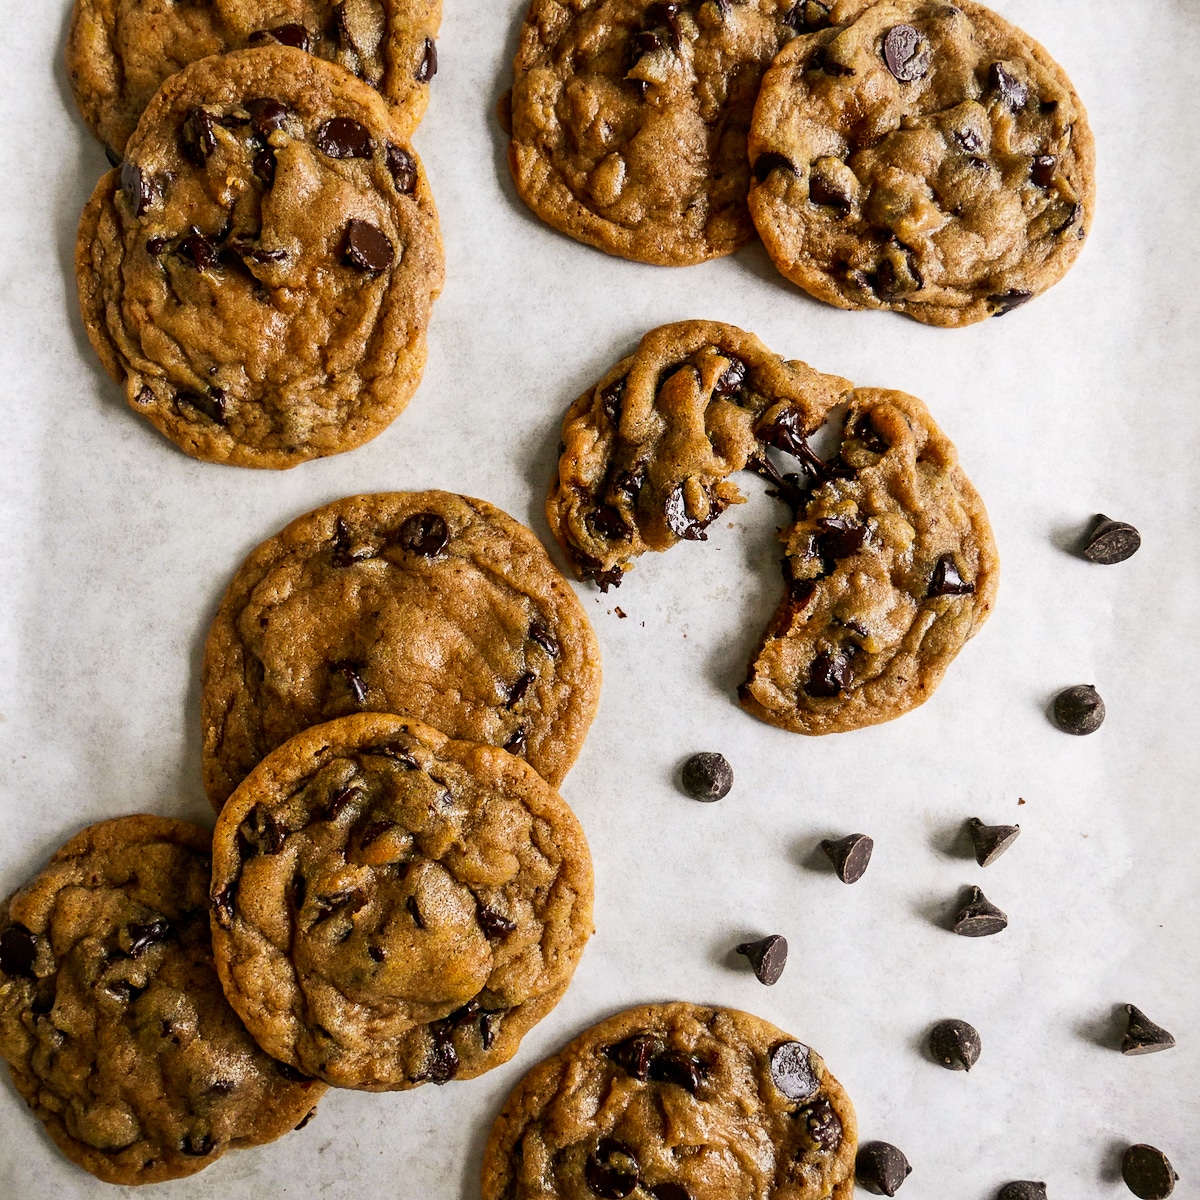 cookies arranged on a baking sheet with chocolate chips.